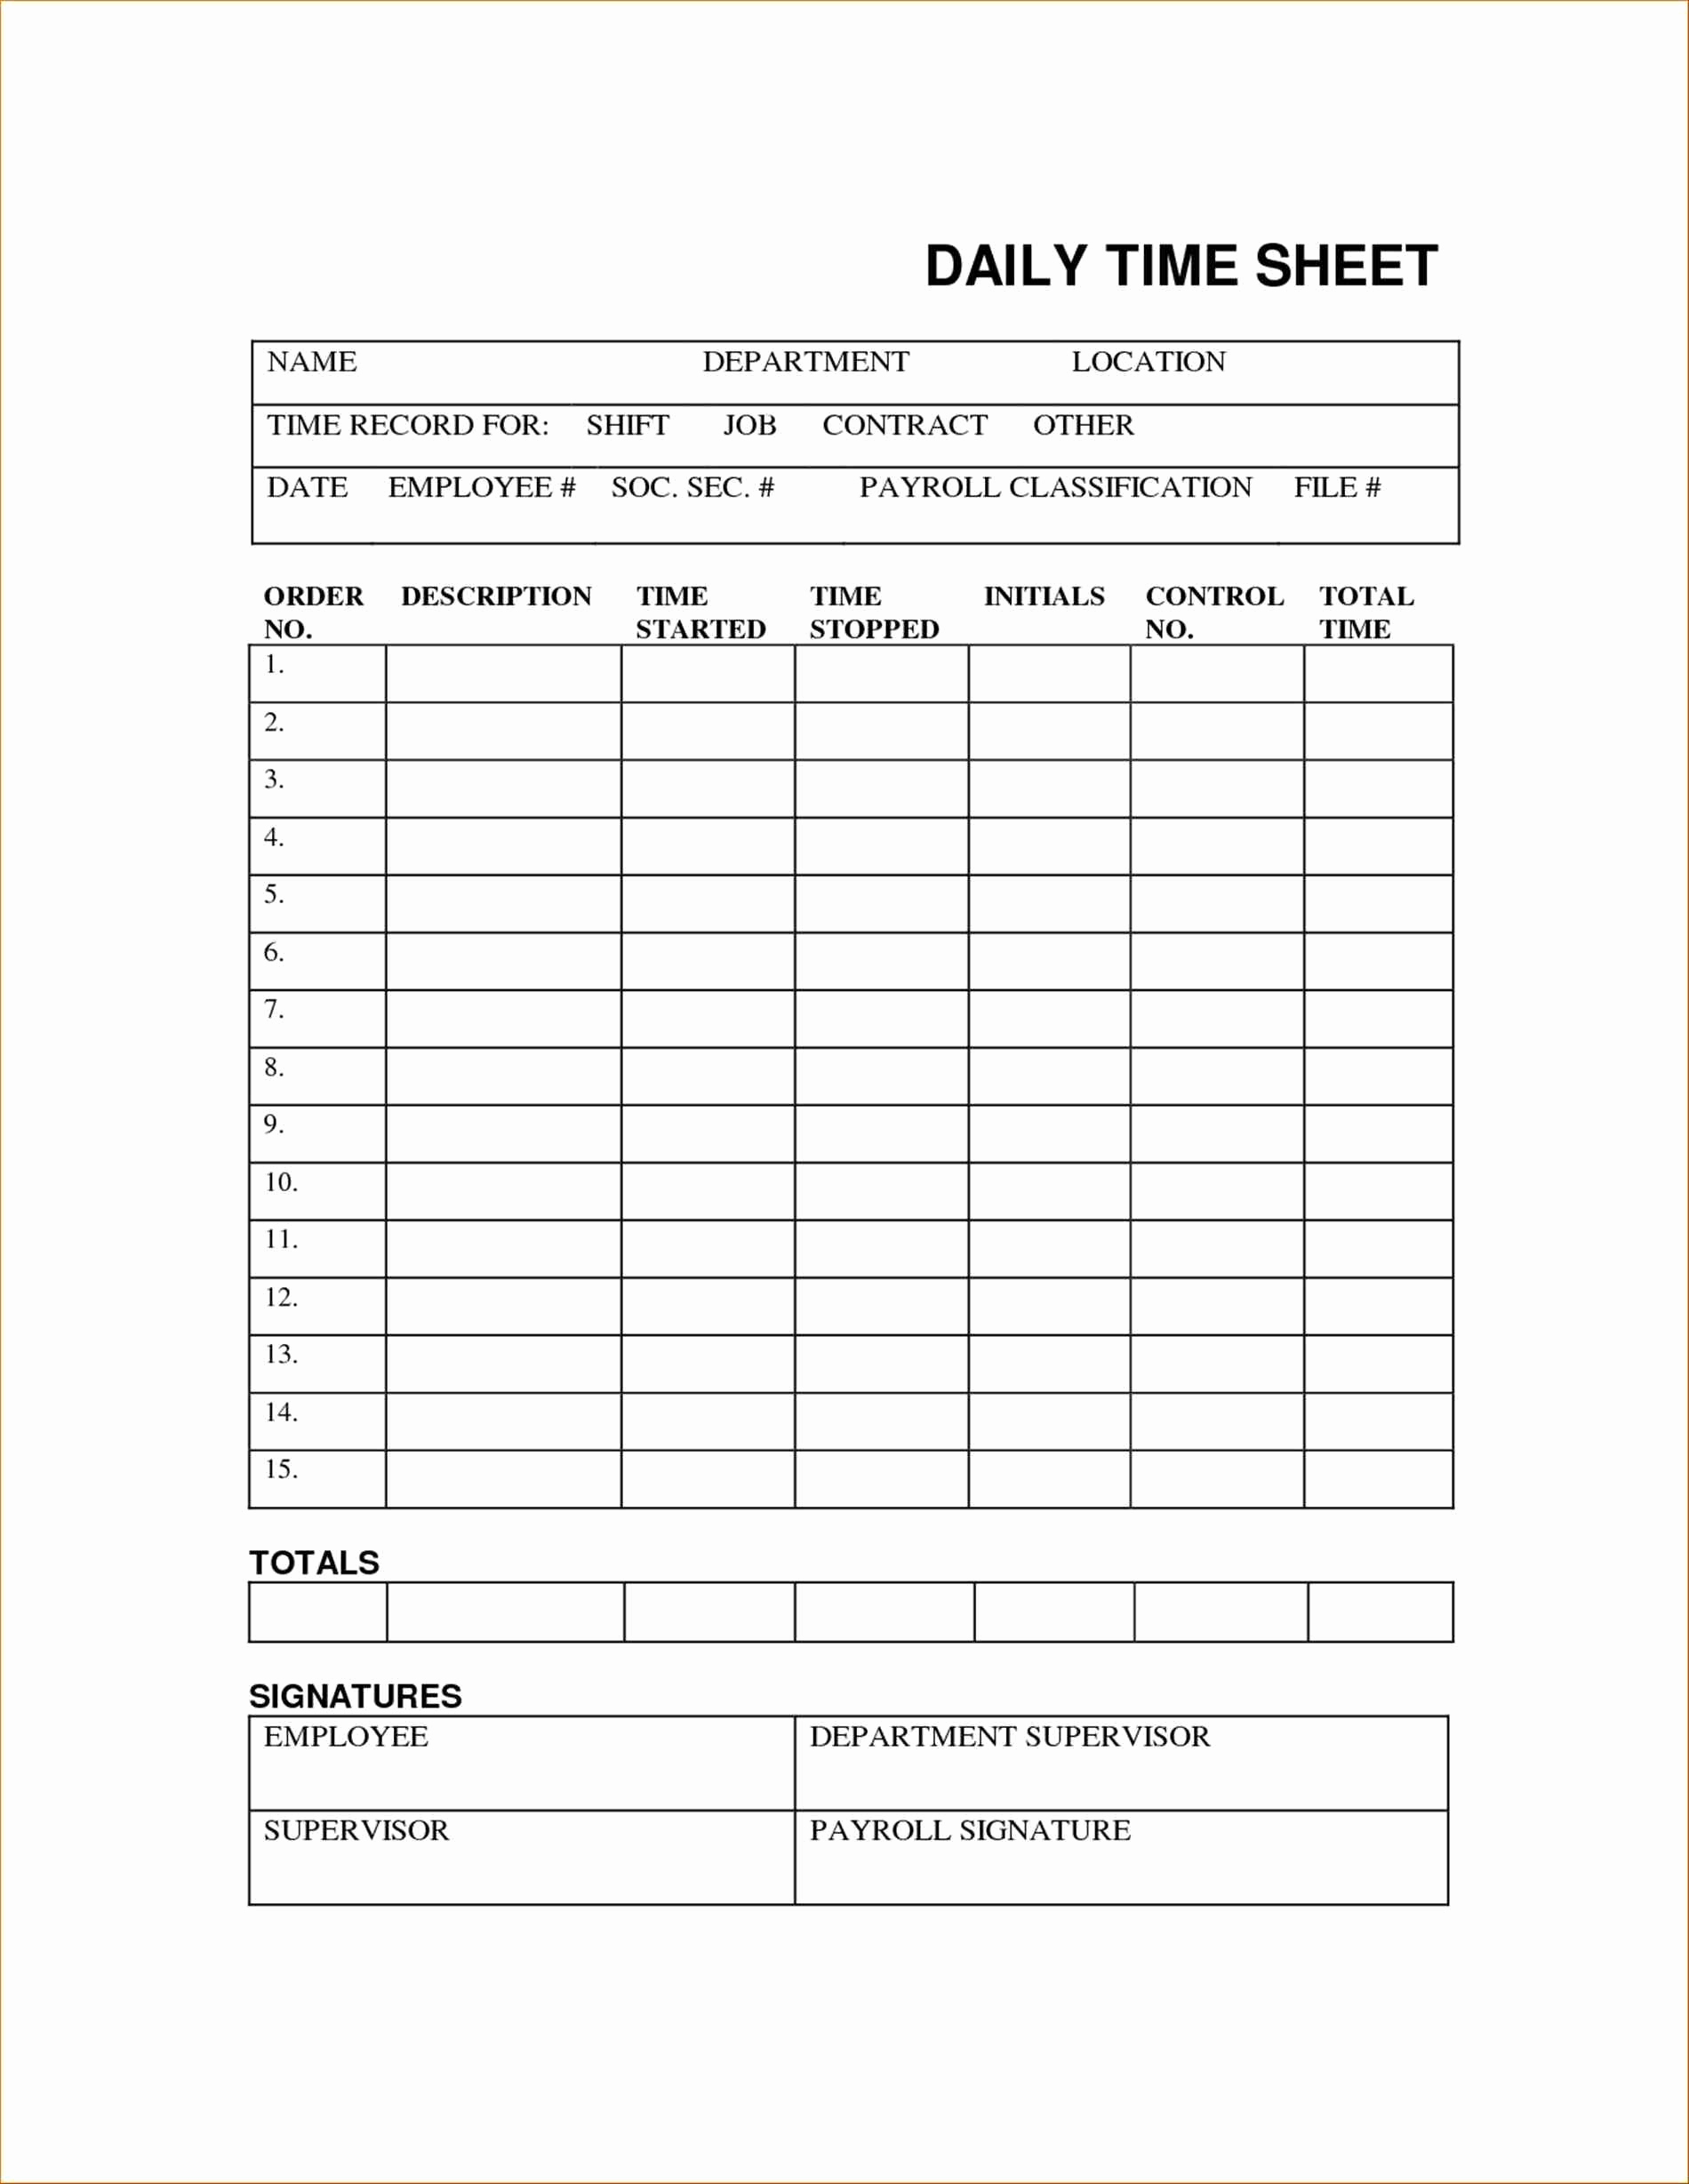 printable-daily-time-sheets-template-business-psd-excel-word-pdf